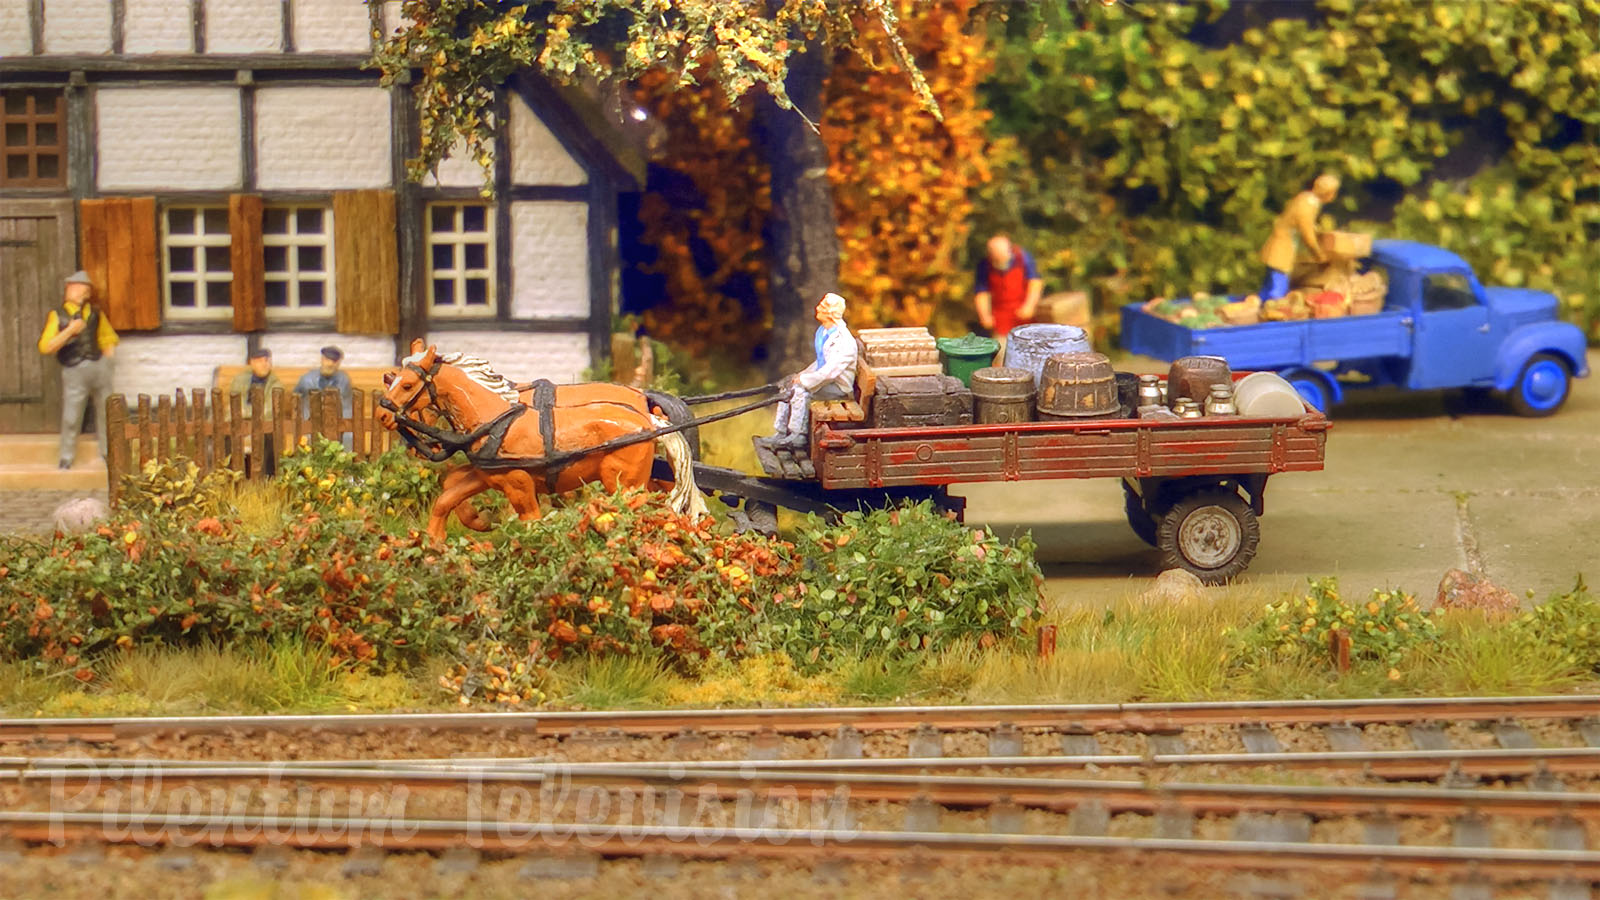 Countryside HO Scale Layout of Northern Germany - Old Steam Locomotives and Trains